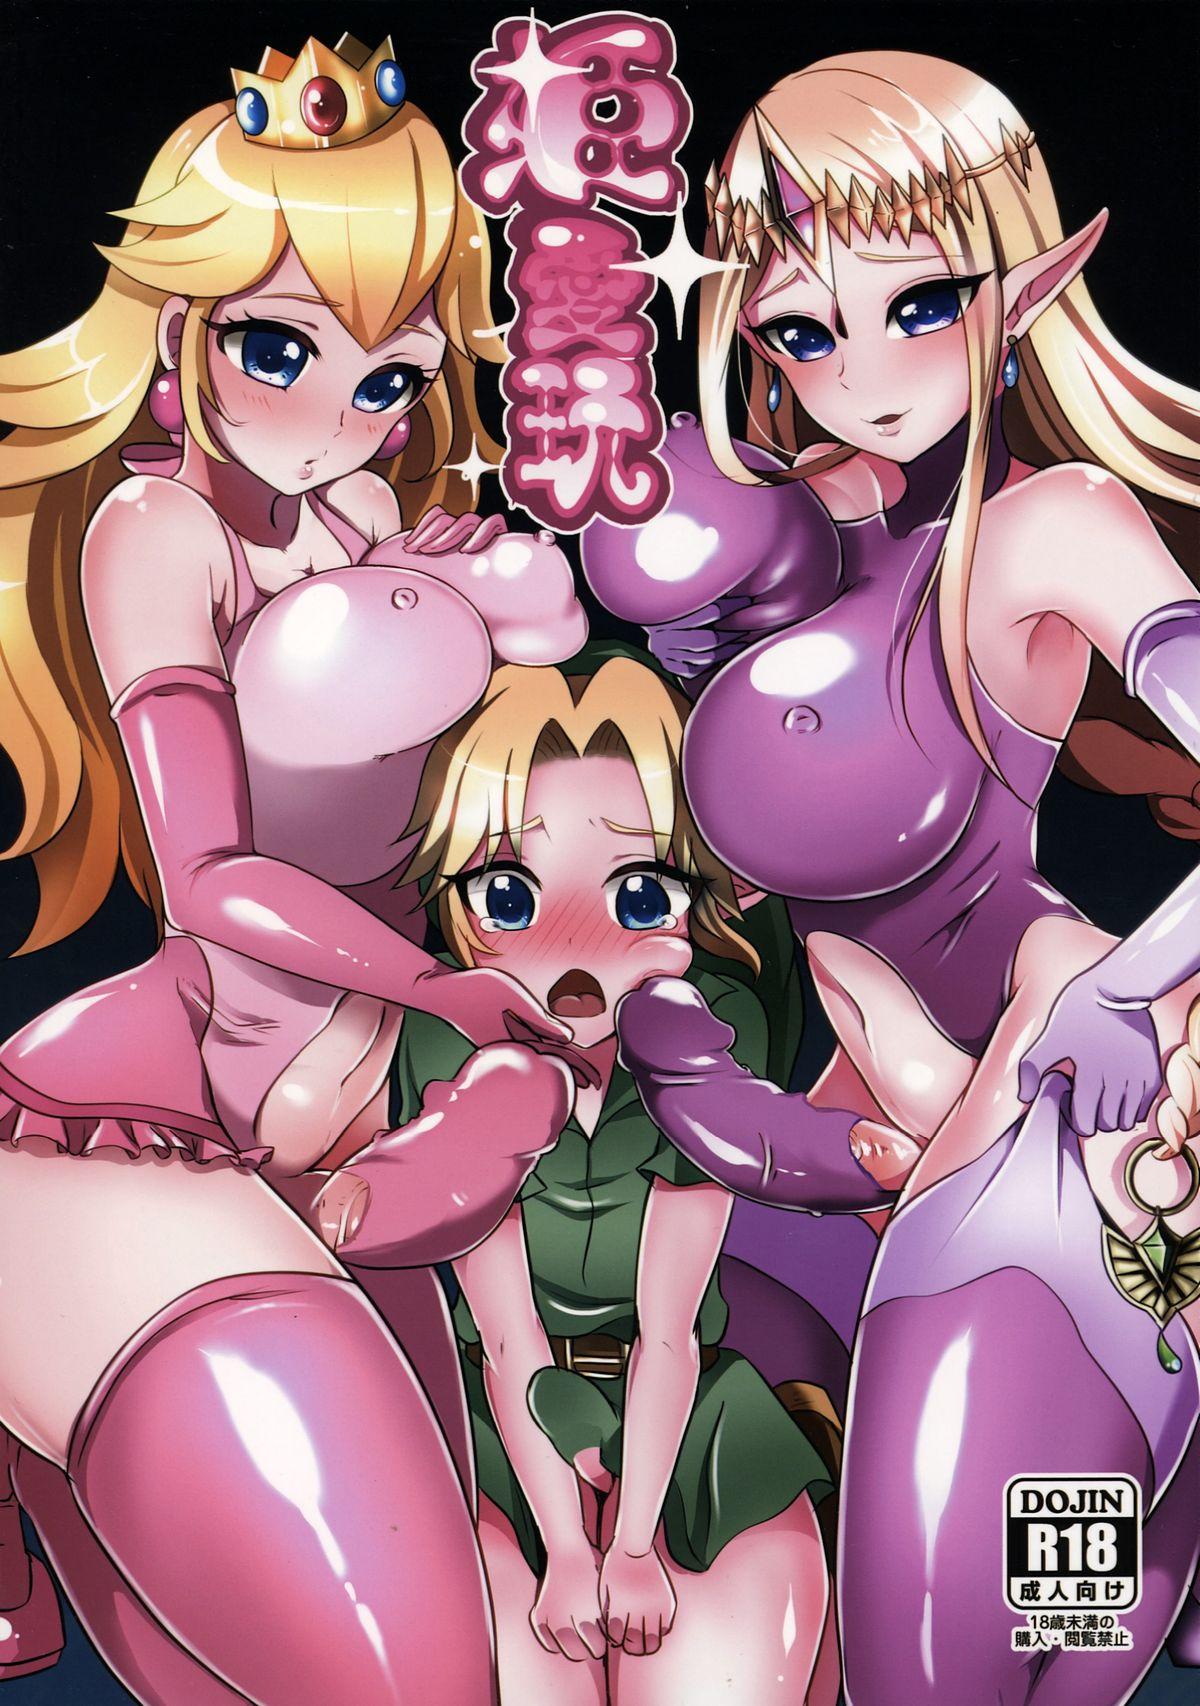 Culo Hime Aigan - The legend of zelda Super mario brothers Ex Girlfriends - Picture 1